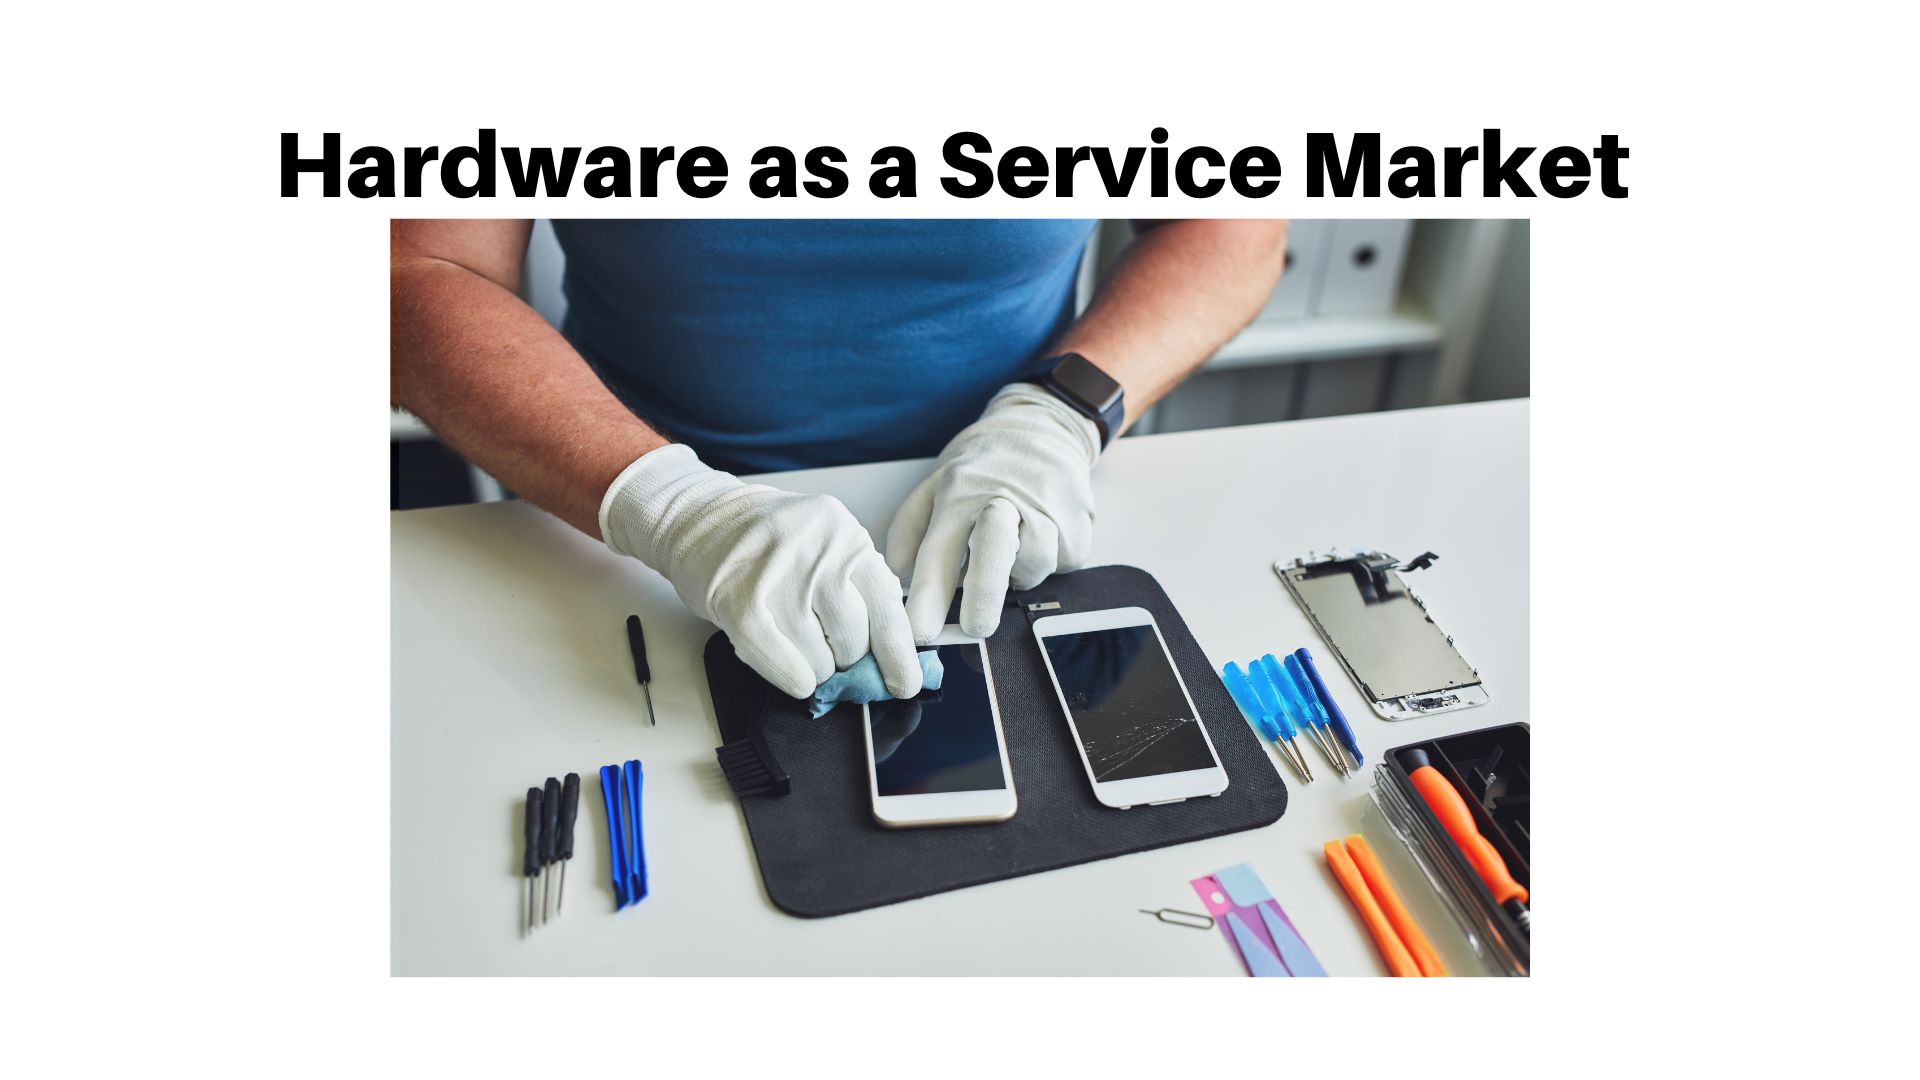 Hardware as a Service Market Size USD 937.75 bn by 2032: A Road-map for Industry Success